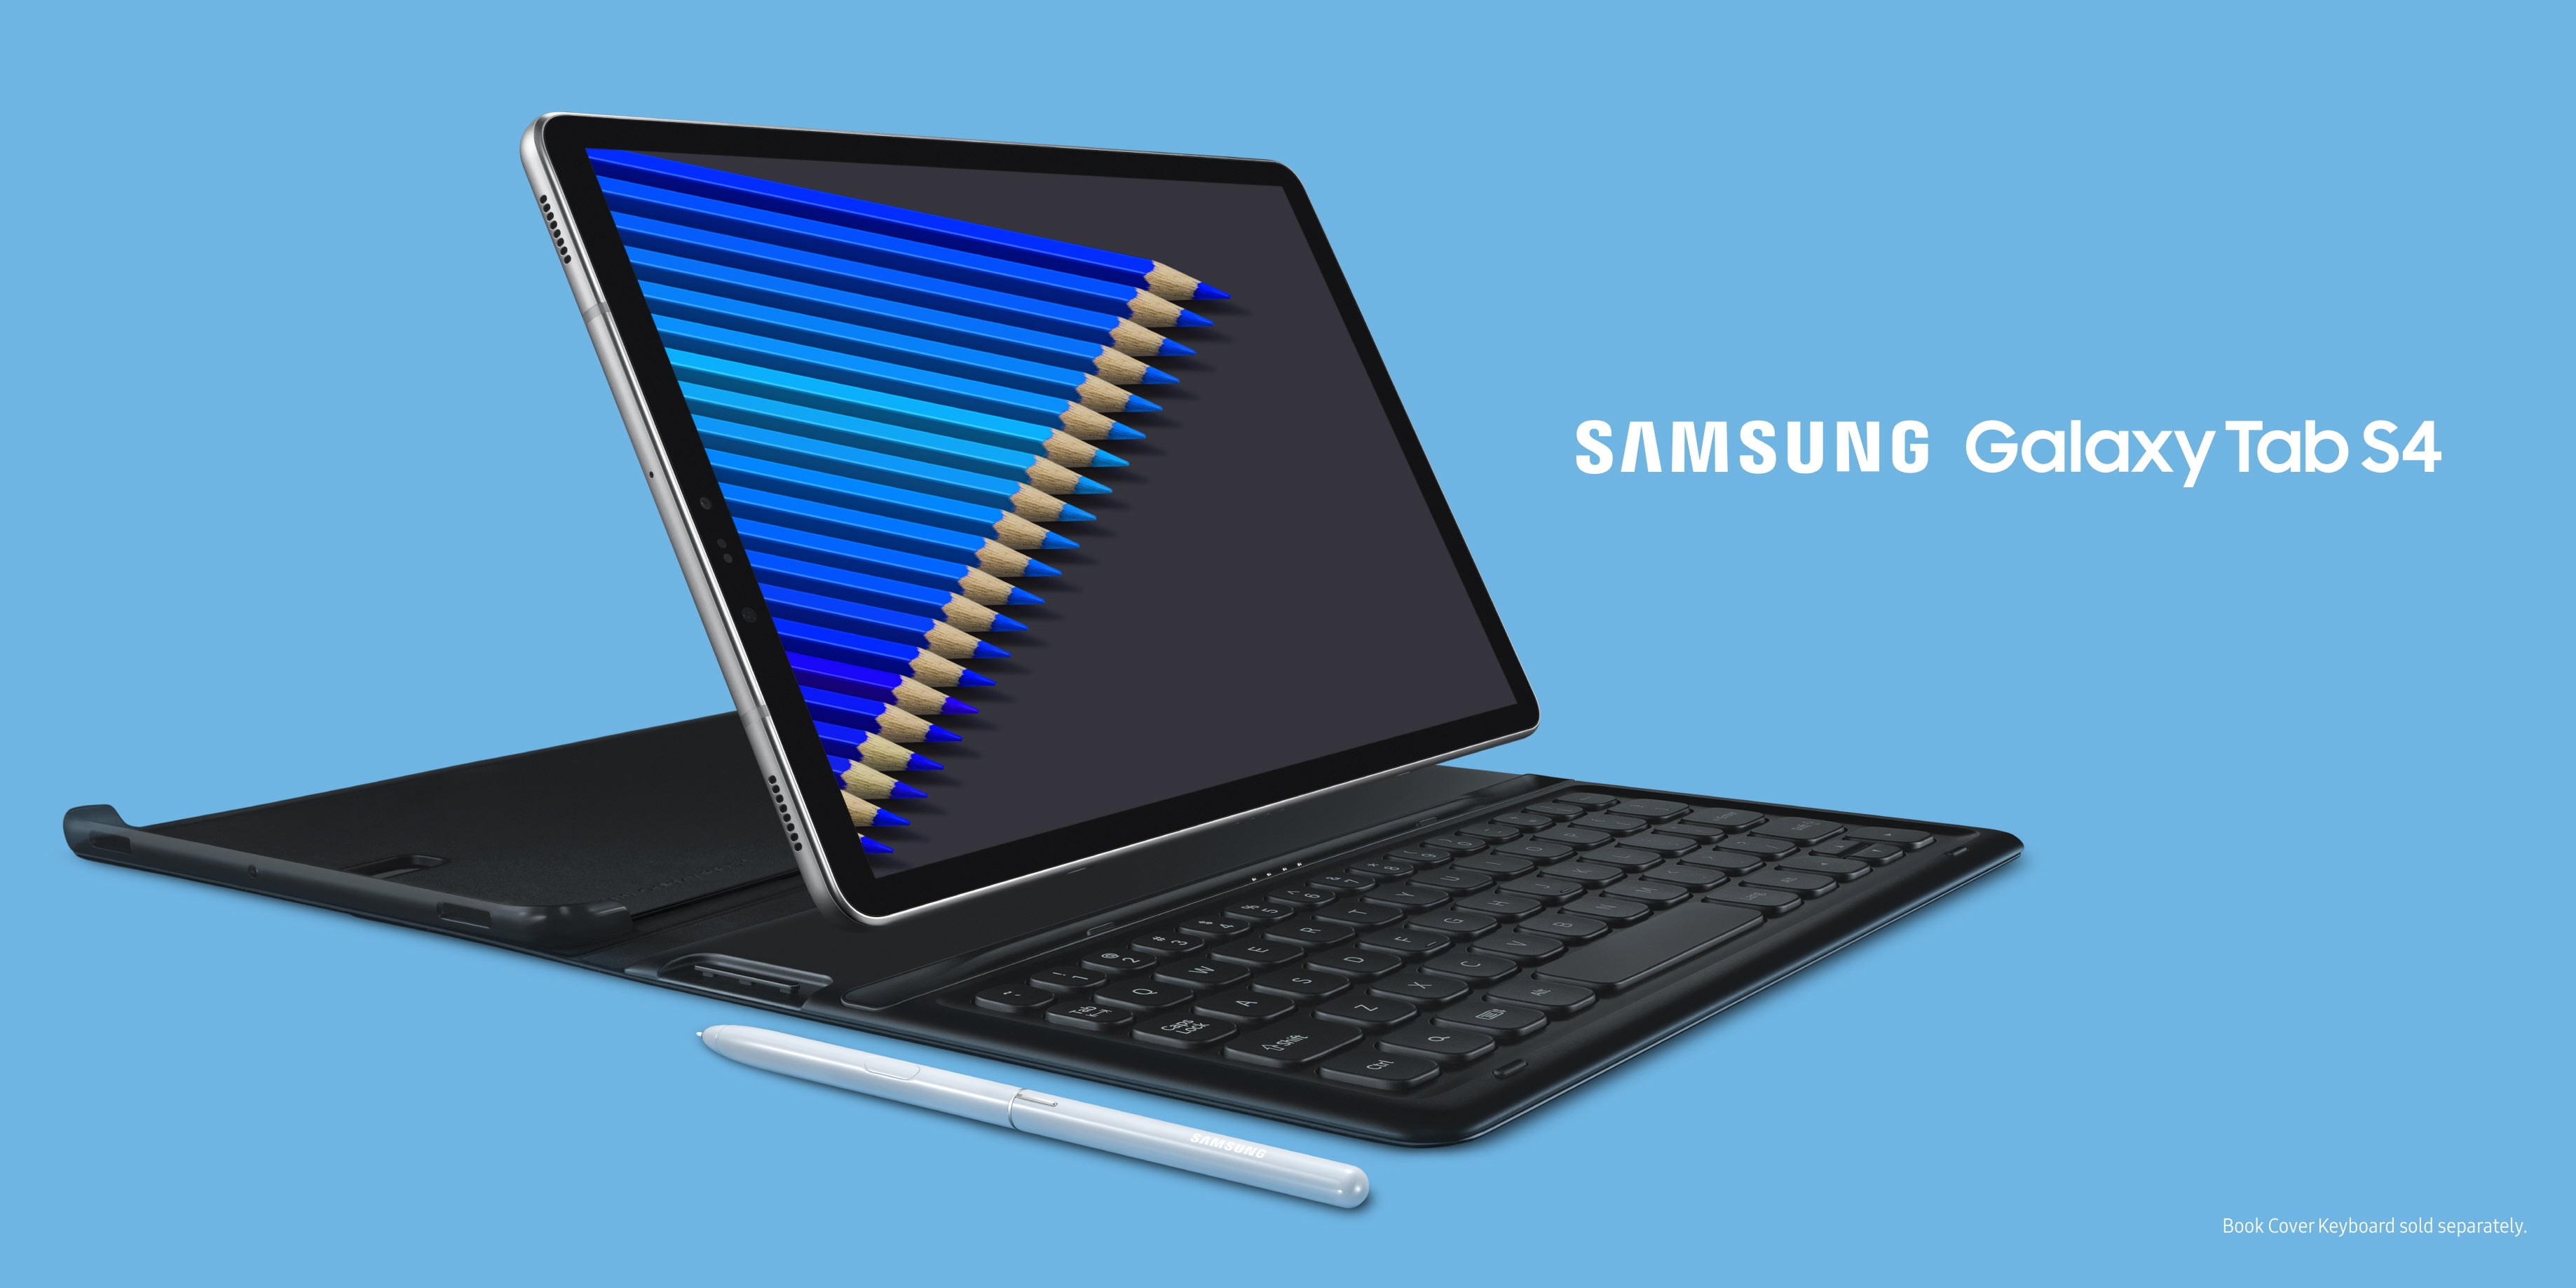 The Tab S4 excels at productivity related tasks - Galaxy Tab S4 vs Tab A 10.5: Which should you buy?